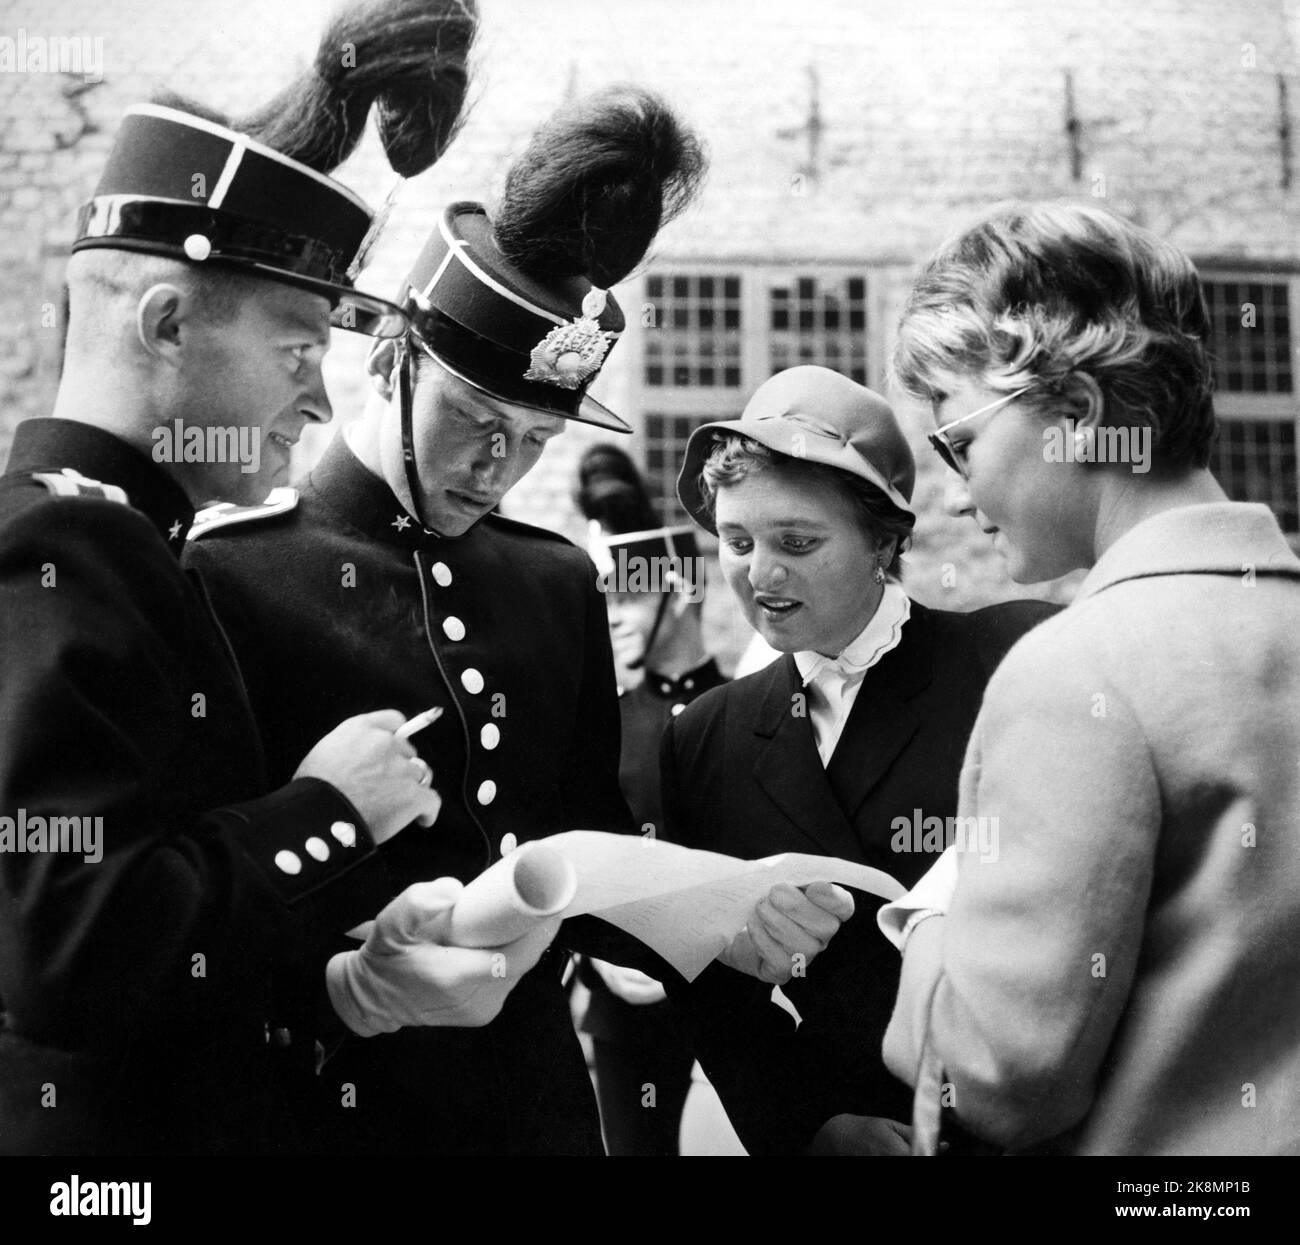 Oslo 19590828 Crown Prince Harald (No. two BCE) at the War School with an unknown lady, who was later identified as Sonja Haraldsen (t.h.). This is the first picture taken of them together. The Crown Prince has received exam witness burden. (The man t.v. is Colonel Børe Norland, later Guard Chief) NEG 4665 (lady # 2 FH in the picture is unidentified). Photo: Bjørn Glorvigen / NTB  NB! Must be credited to Bjørn Glorvigen! Stock Photo